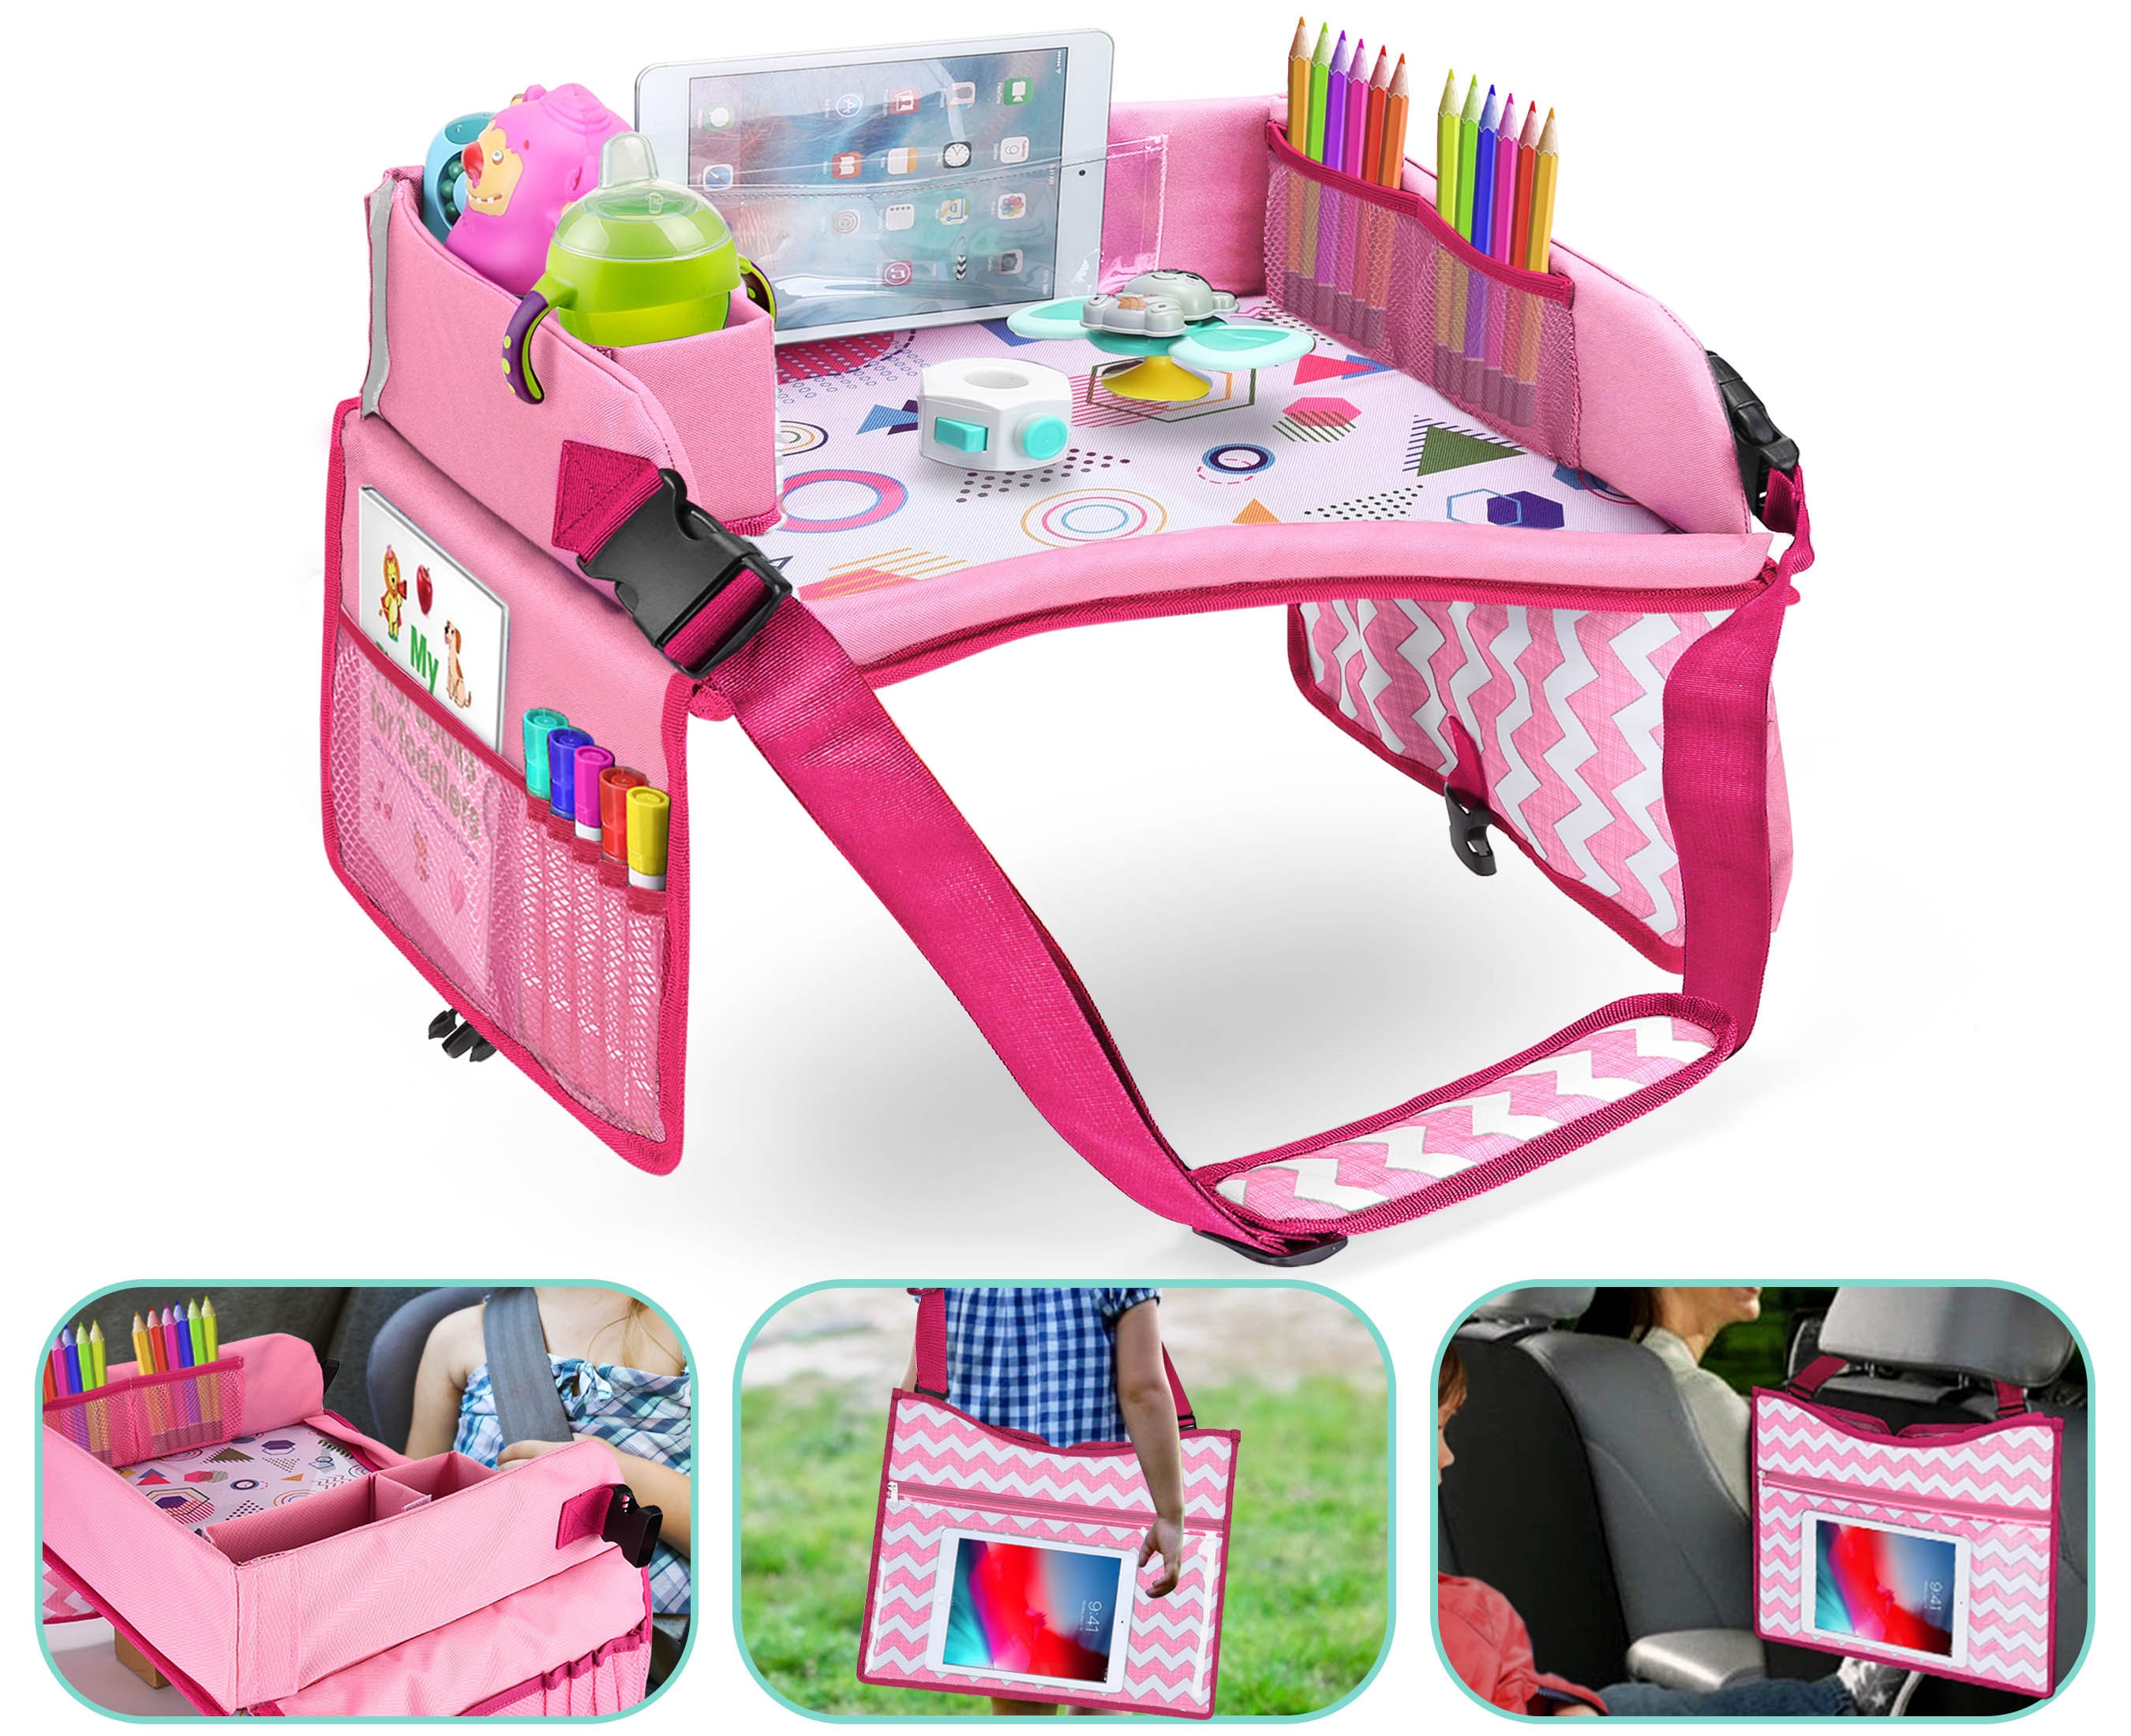 Innokids Kids Travel Lap Tray Children Car Seat Activity Snack and Play Tray Desk with Erasable Surface iPad & Tablet Holder Detachable Organizers